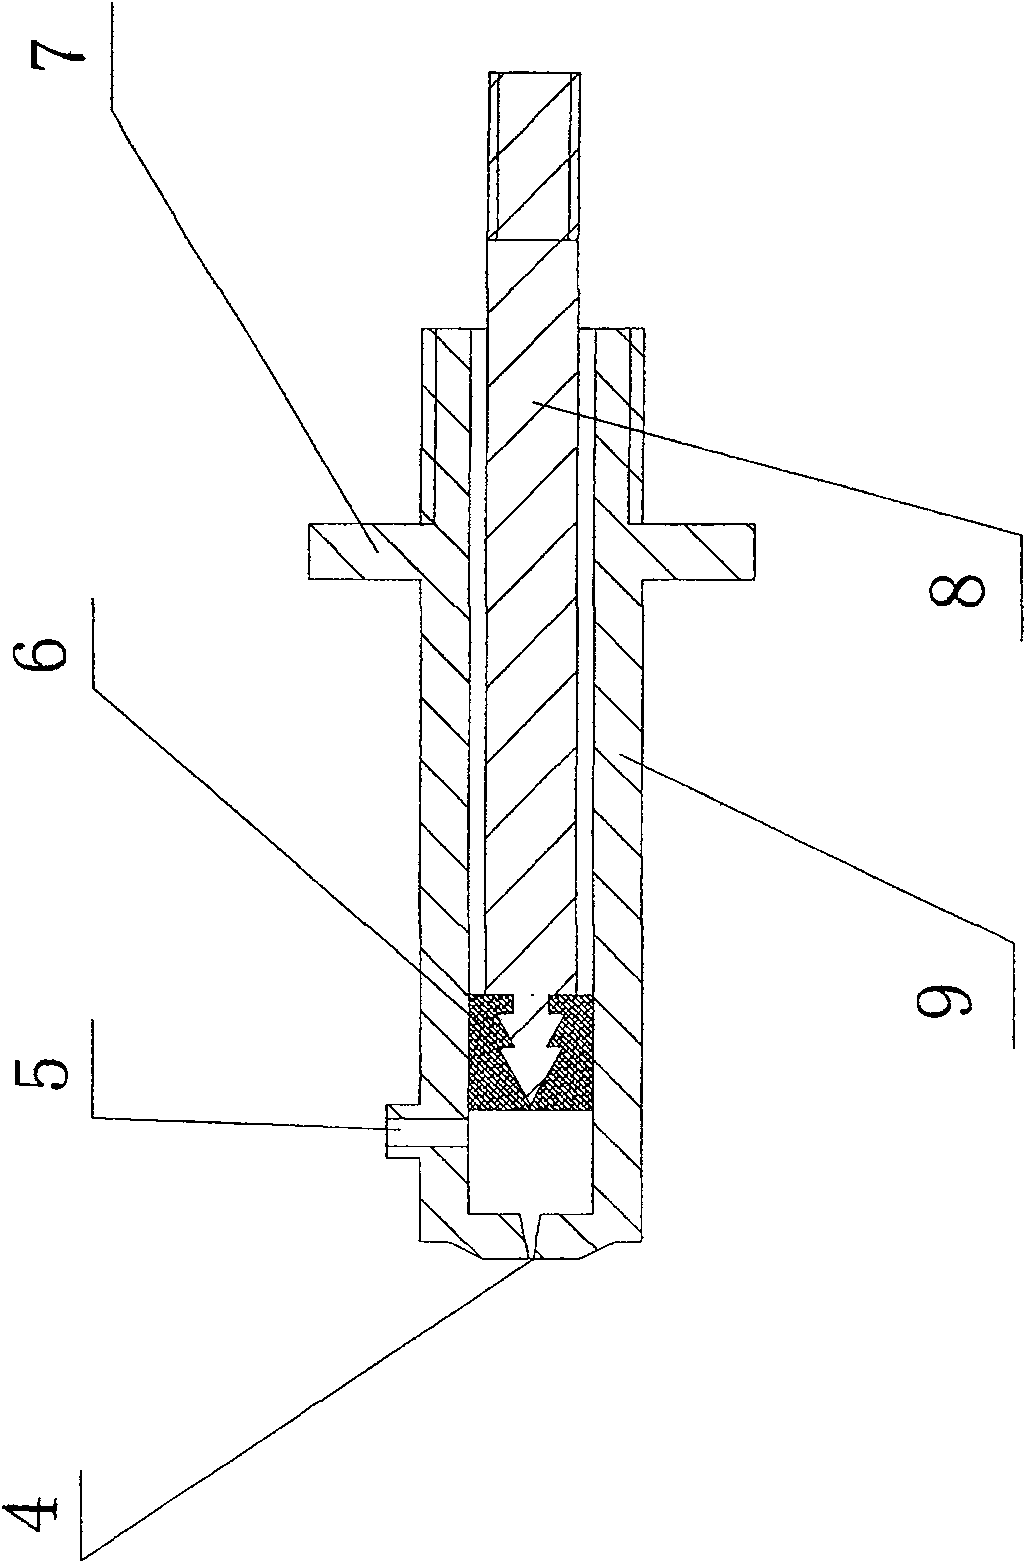 Pulse injection apparatus